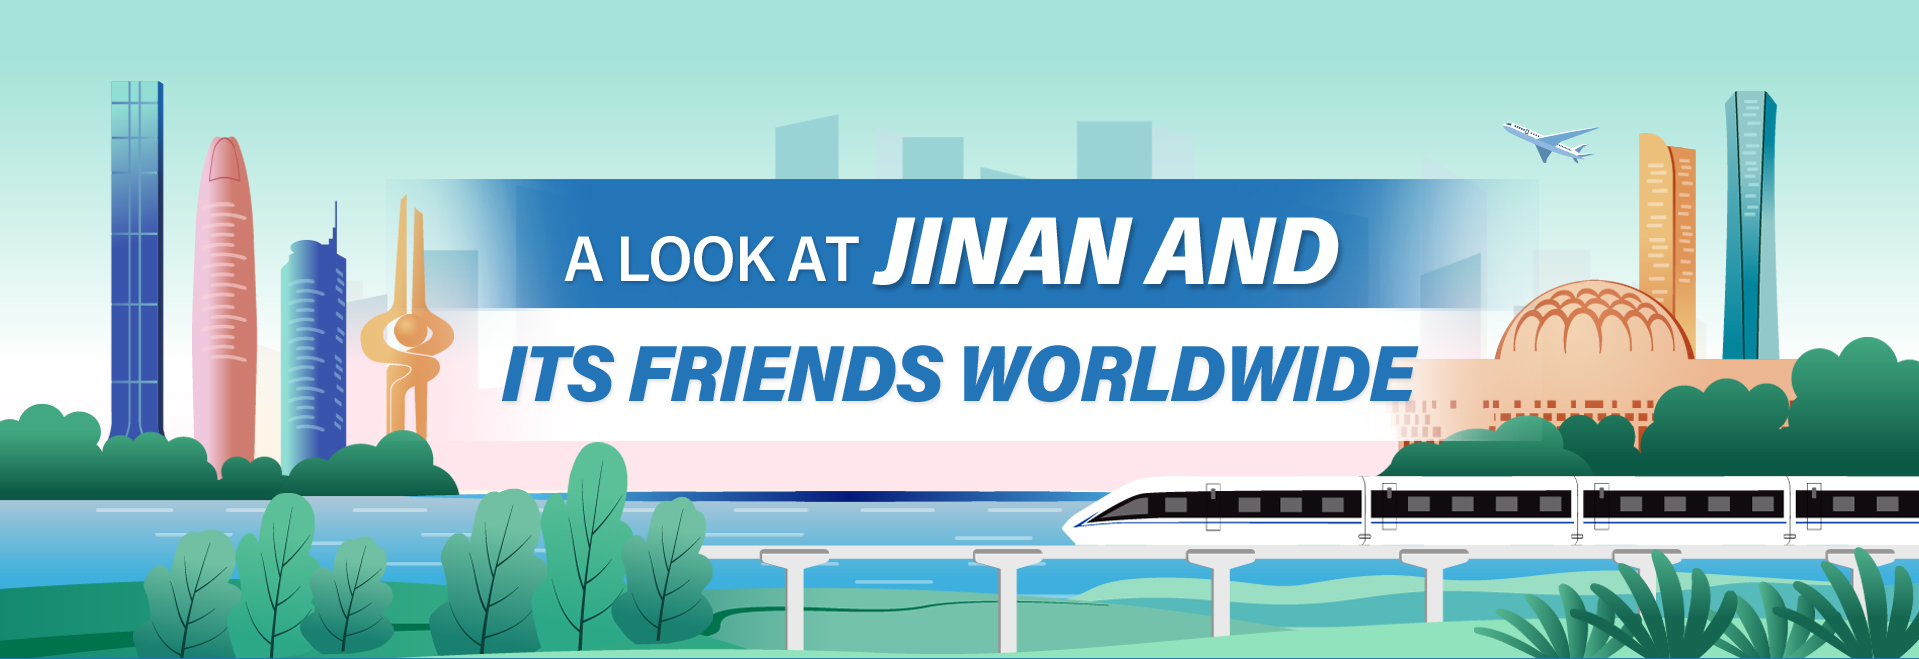 A LOOK AT JINAN AND ITS FRIENDS WORLDWIDE